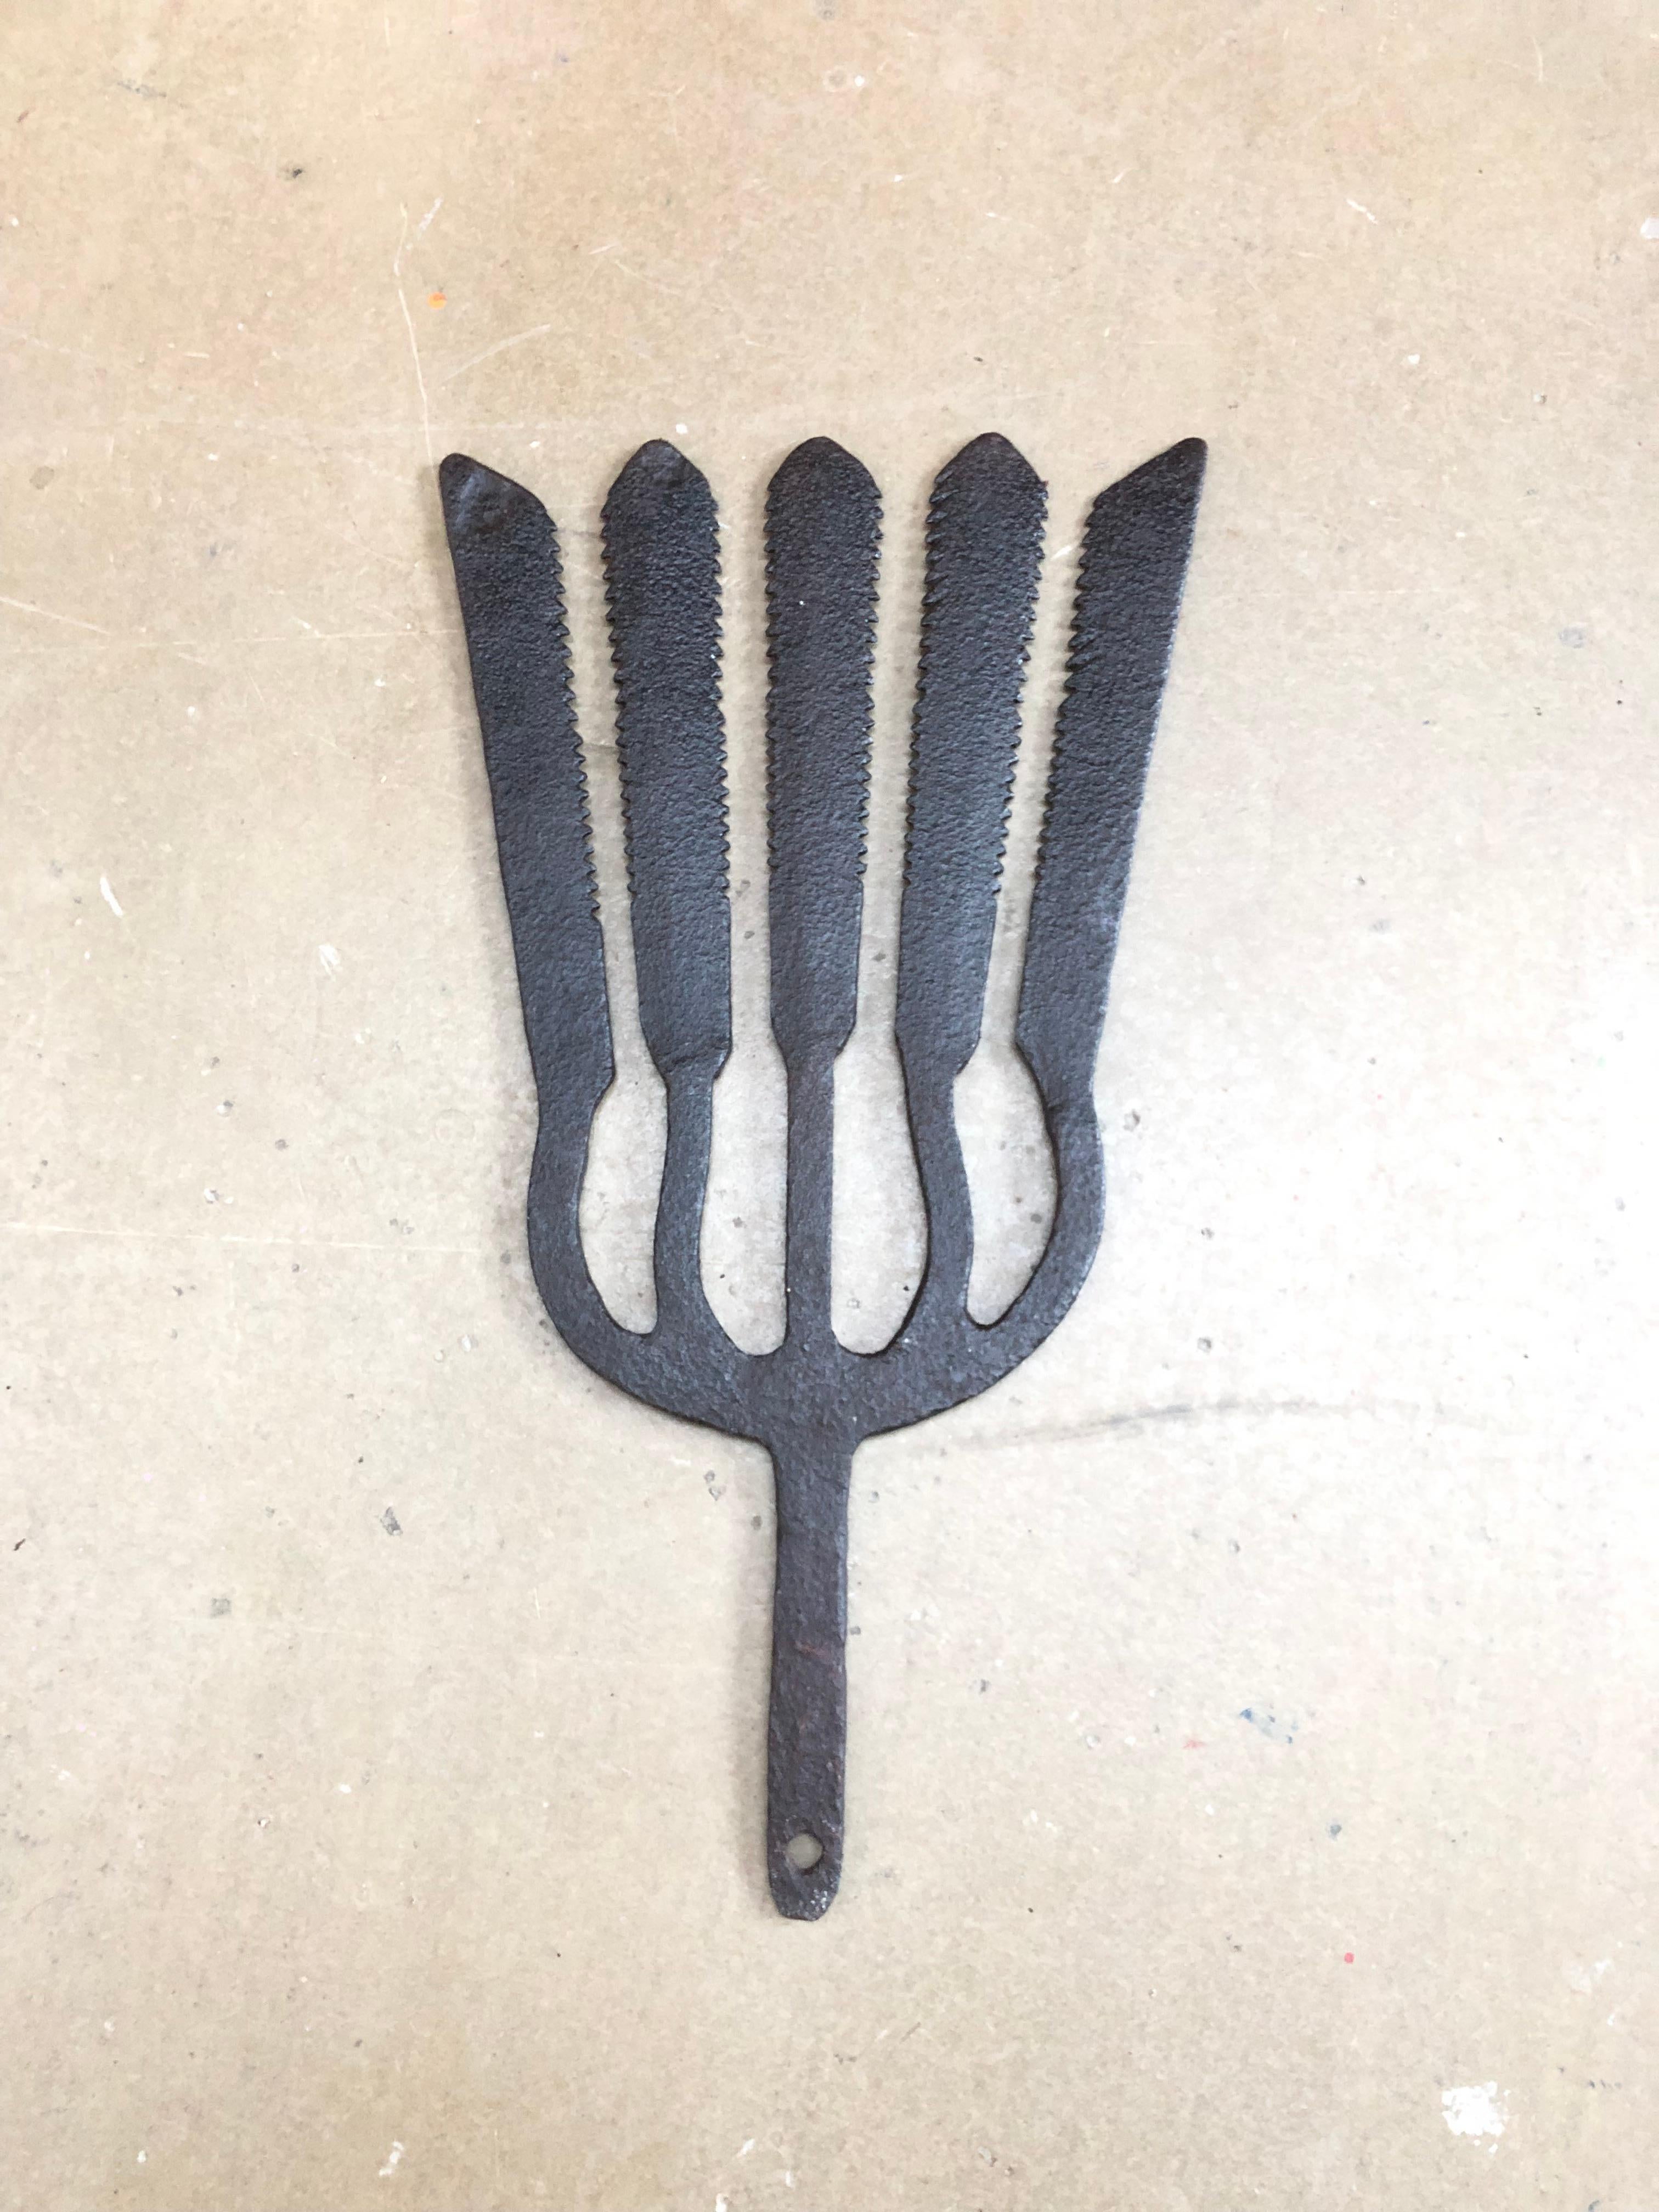 Hand-Crafted Collection of 5 Antique Wrought Iron Eel Forks For Sale